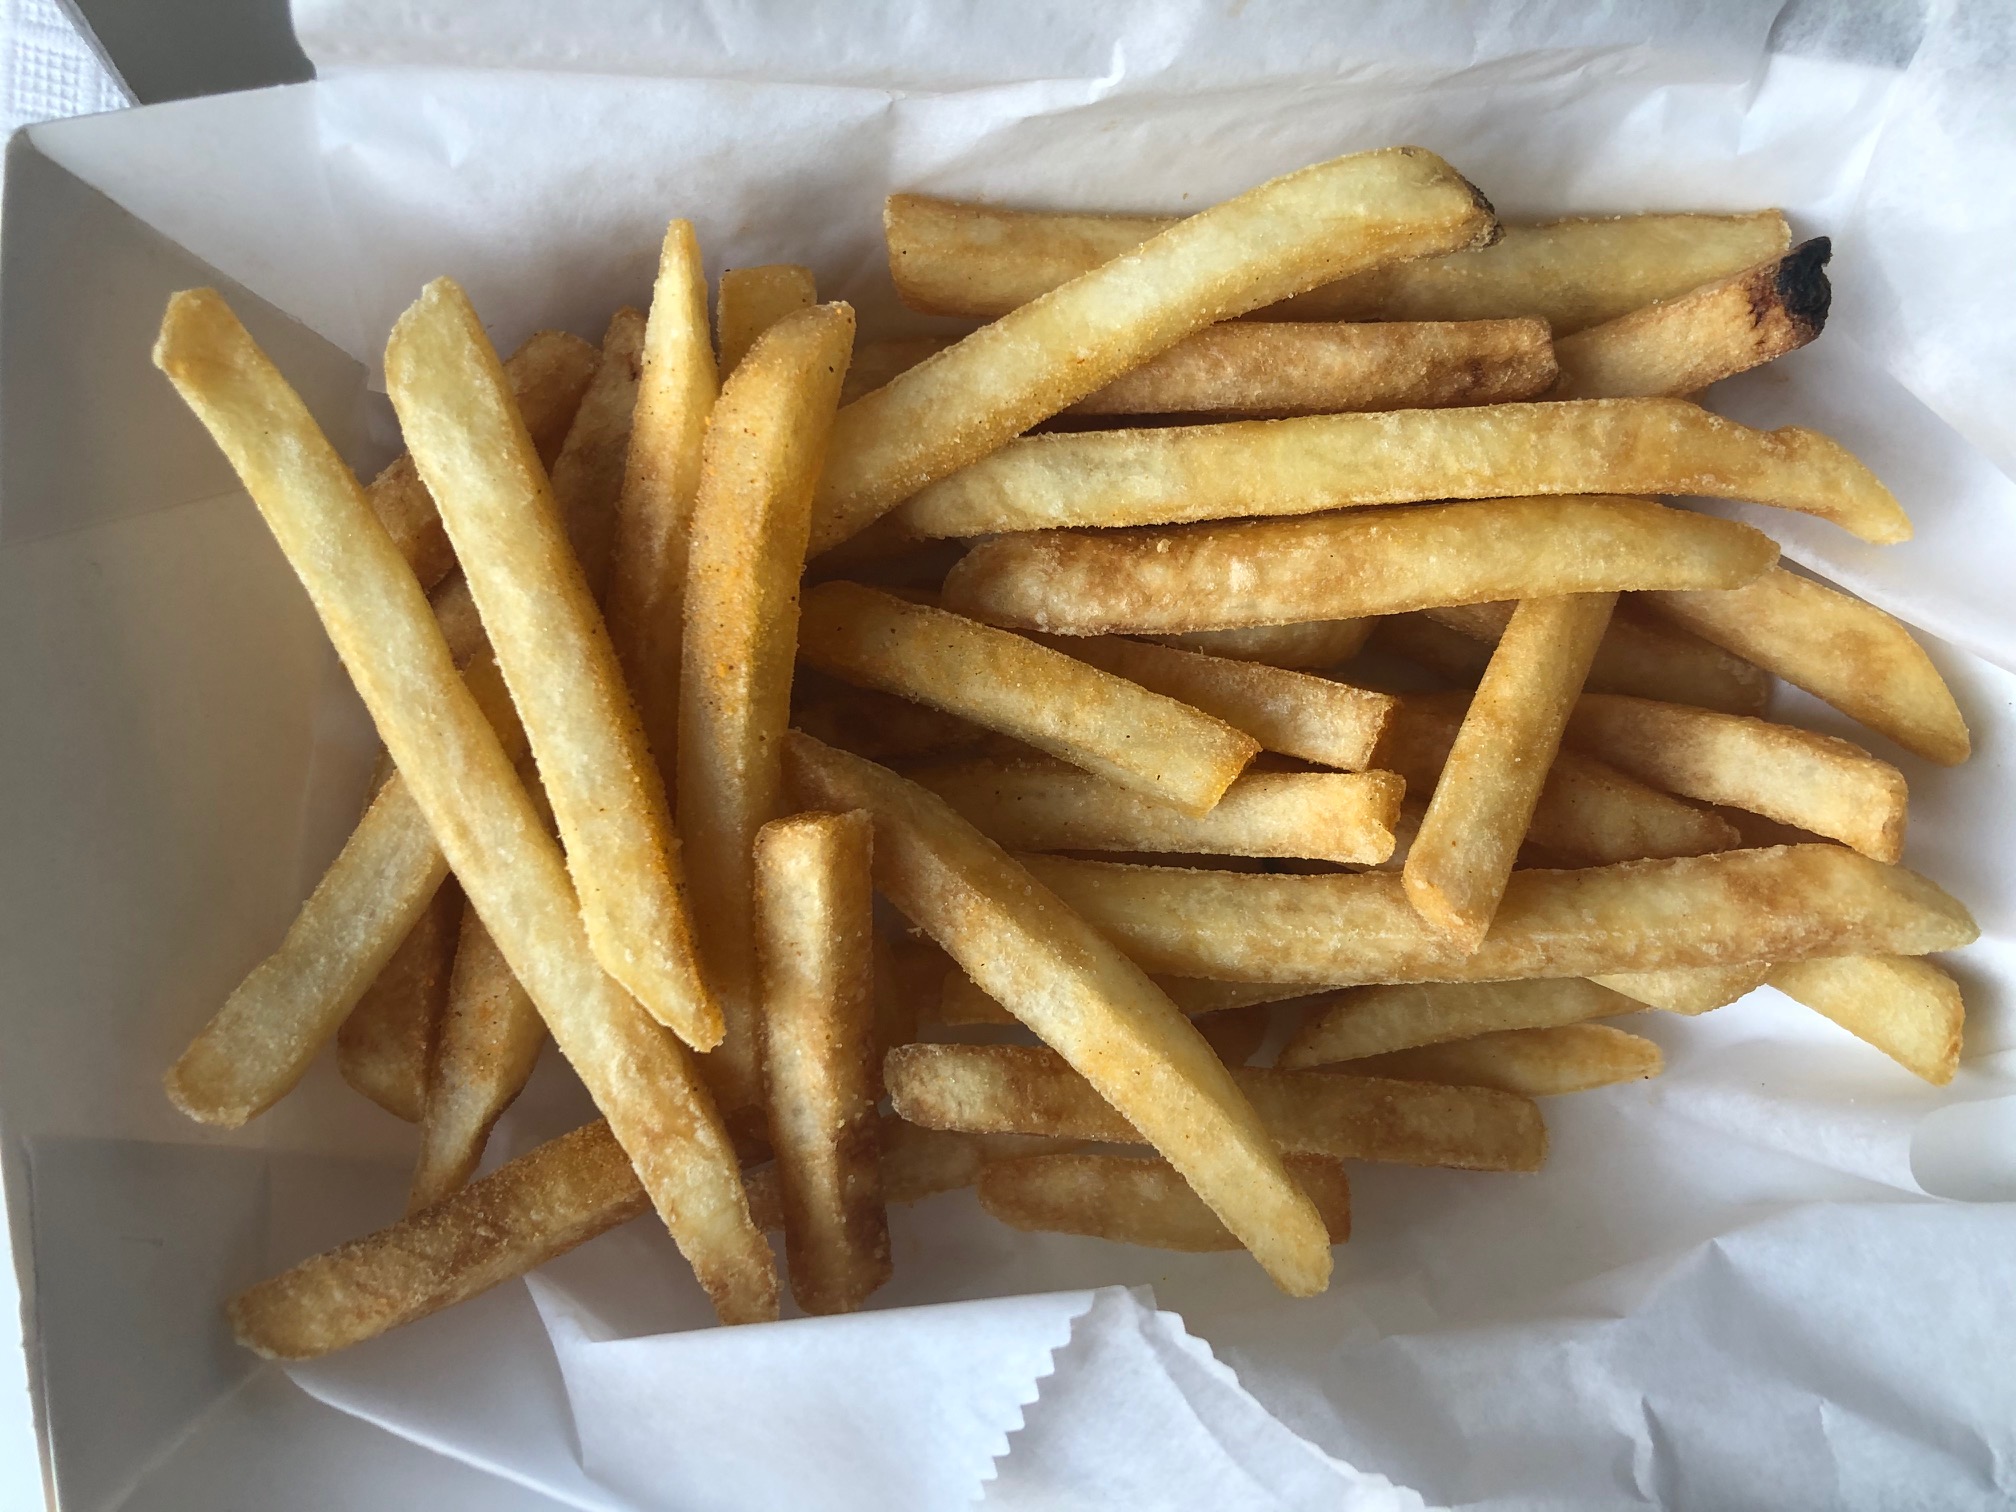 A white carryout box contains a medium sized portion of straight fries dusted with seasoning. Photo by Alyssa Buckley.